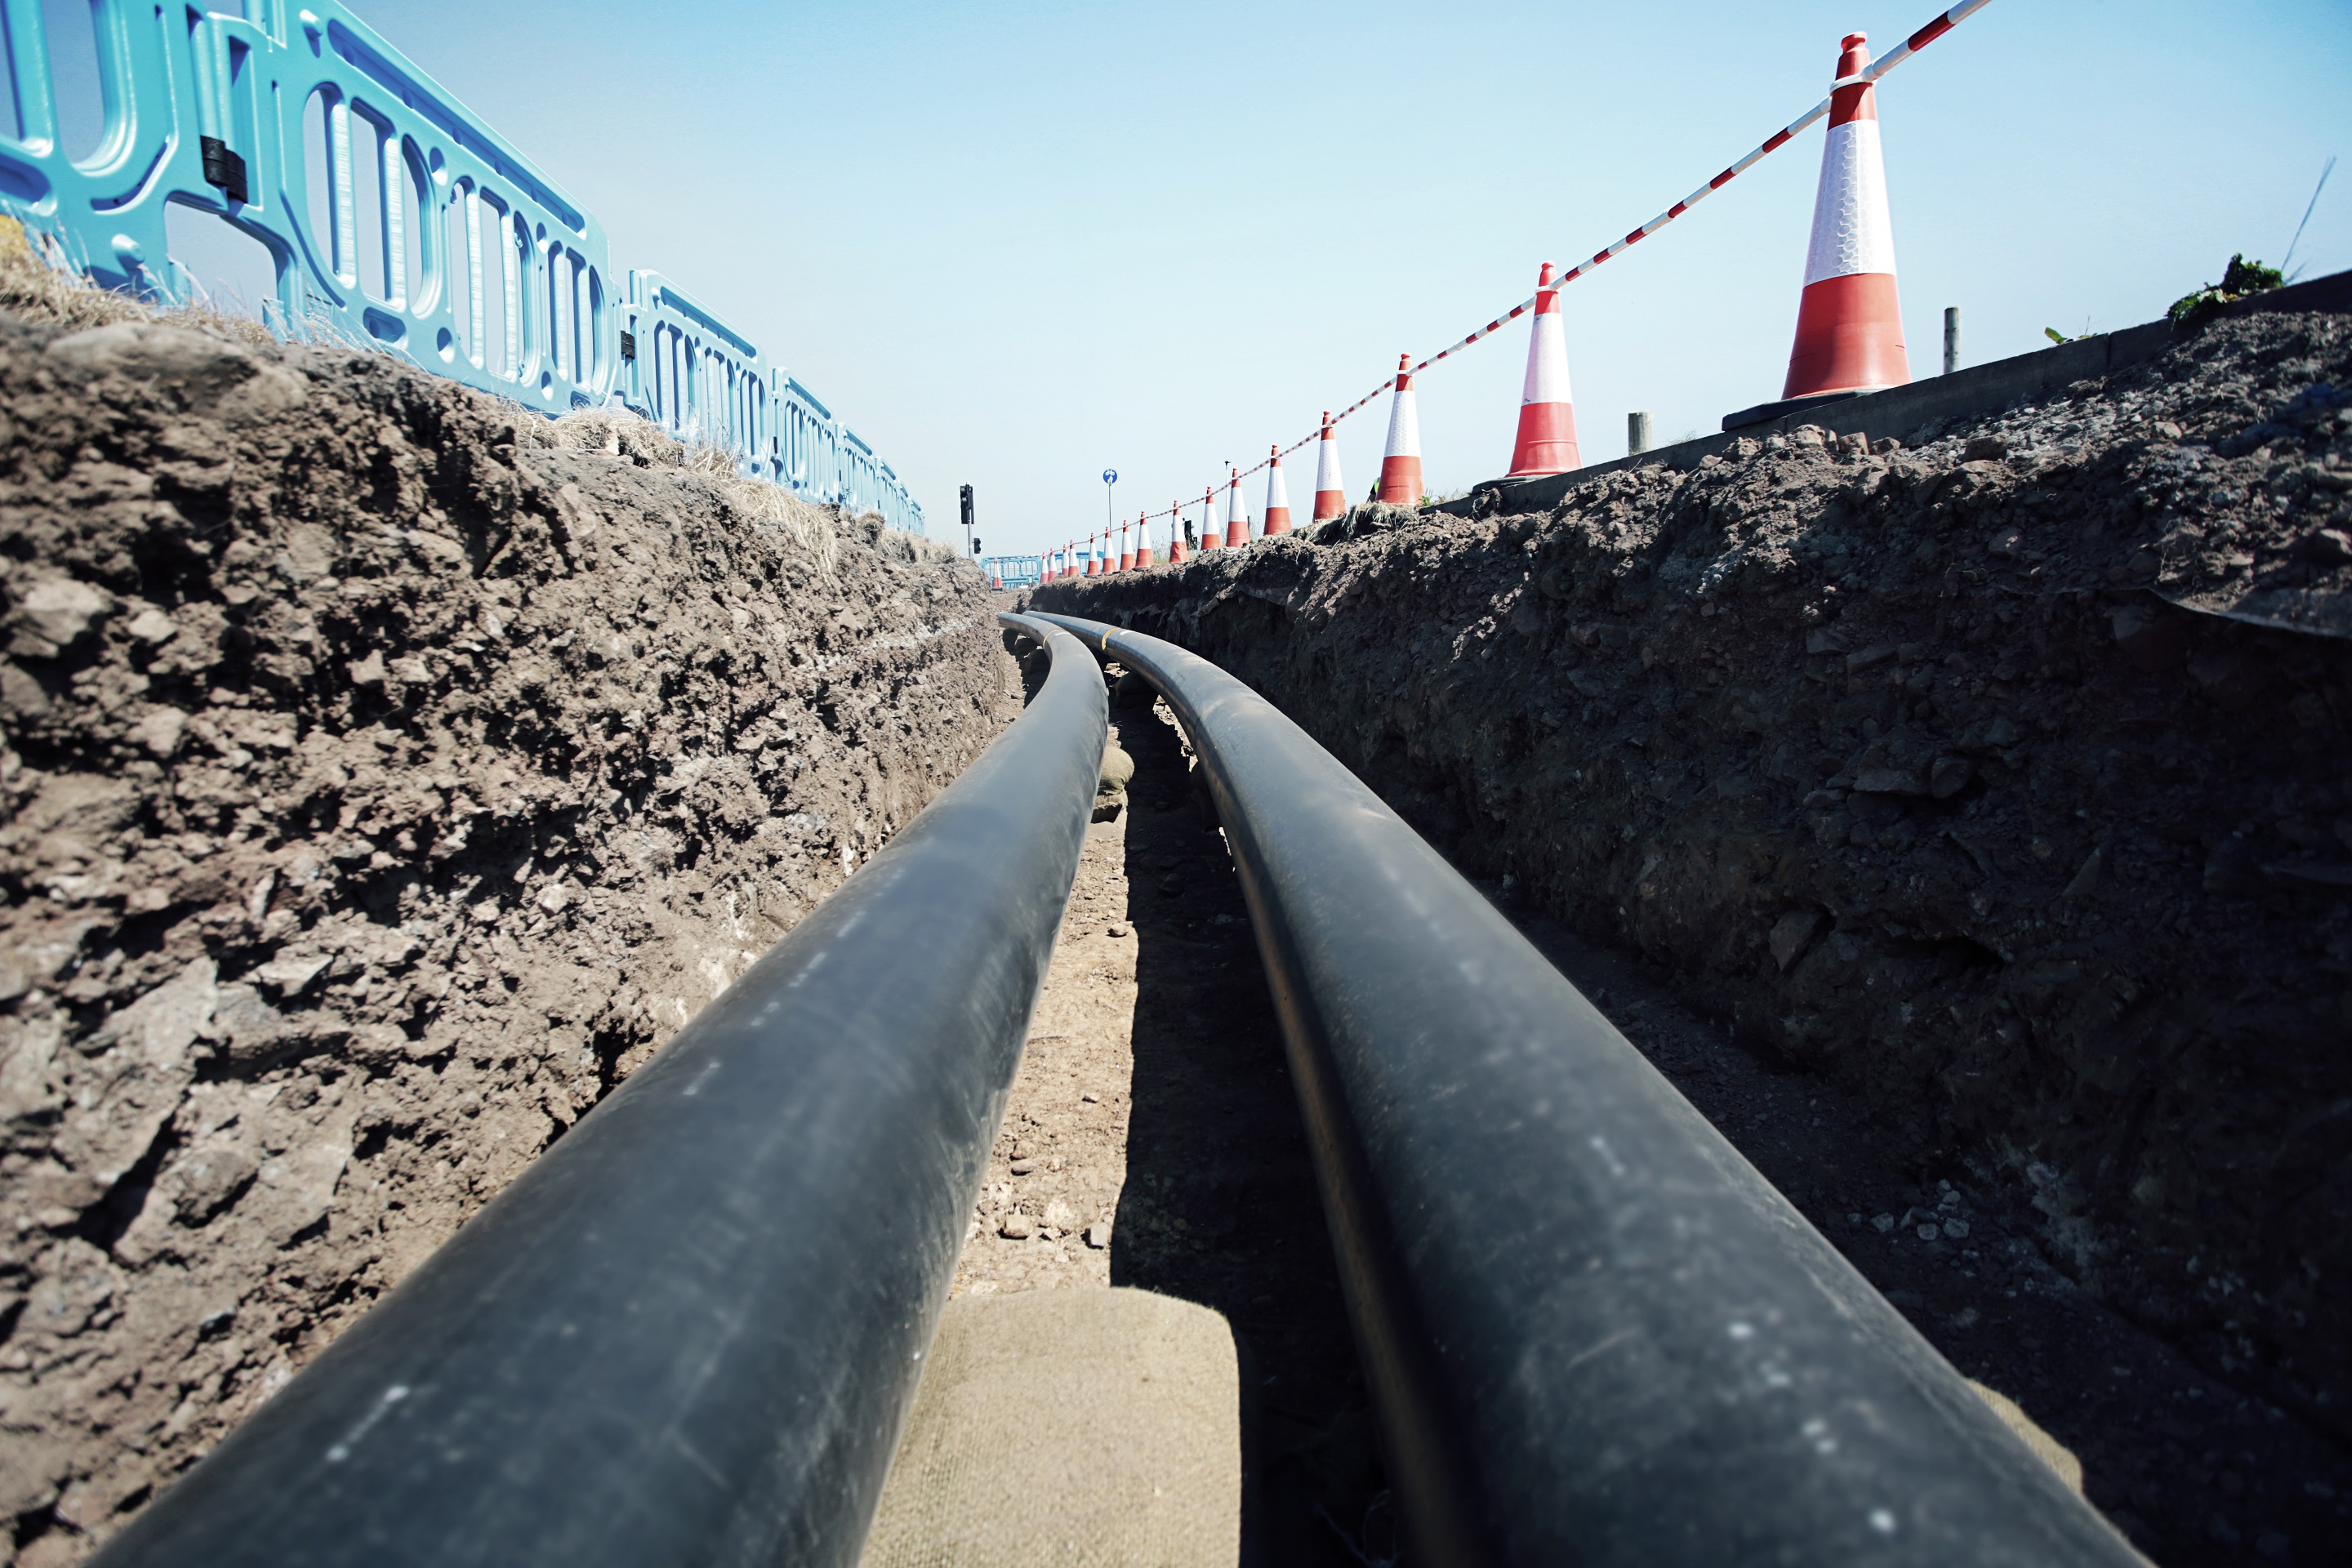 First pipes installed at Shawfair low-carbon heating project